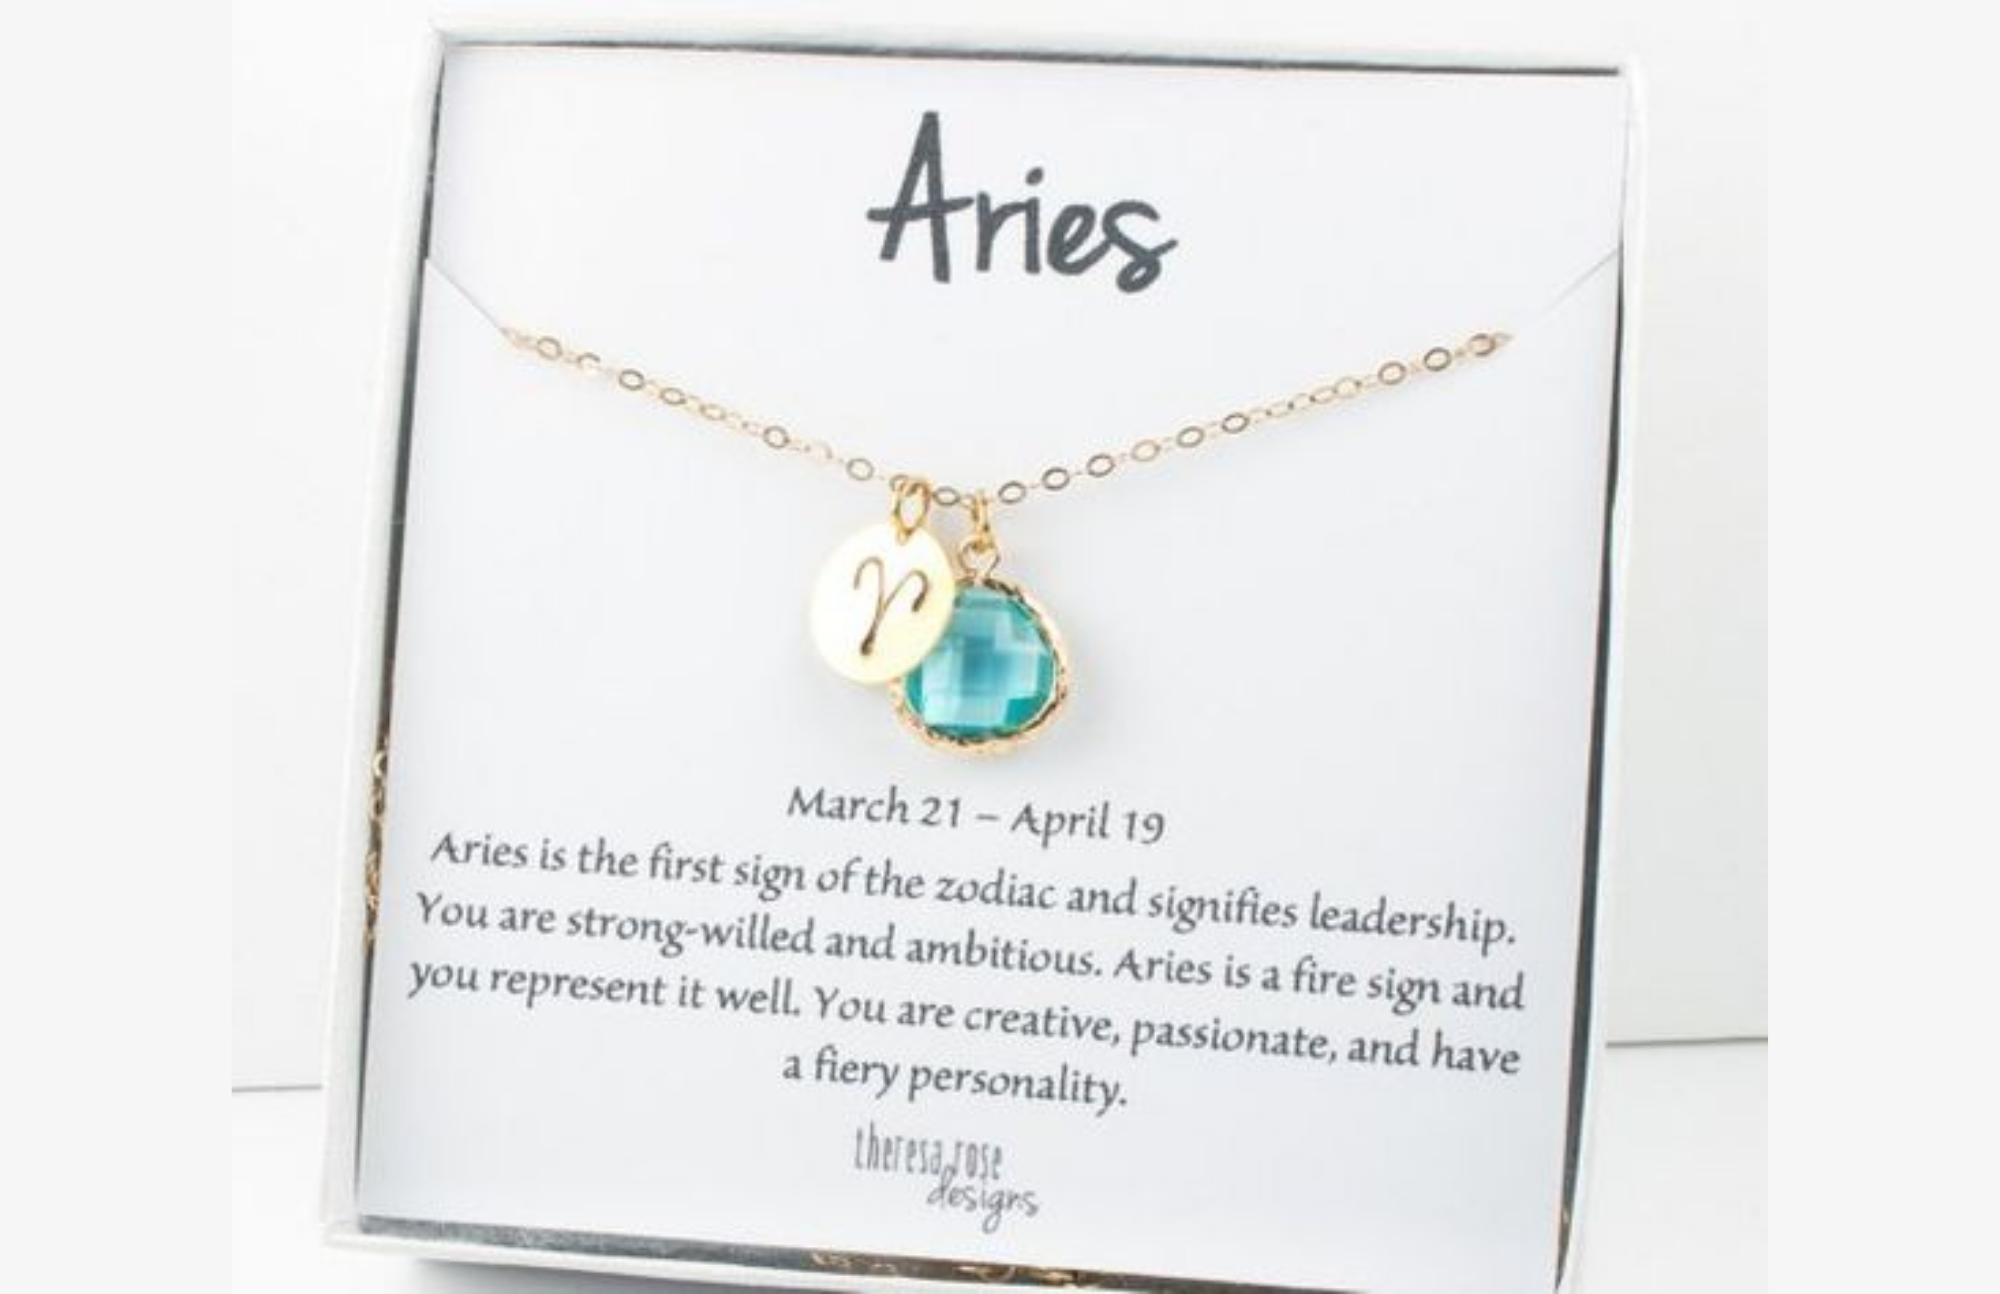 Aries Birthstone Necklace - The Three Famous Aries Necklaces' Characteristics